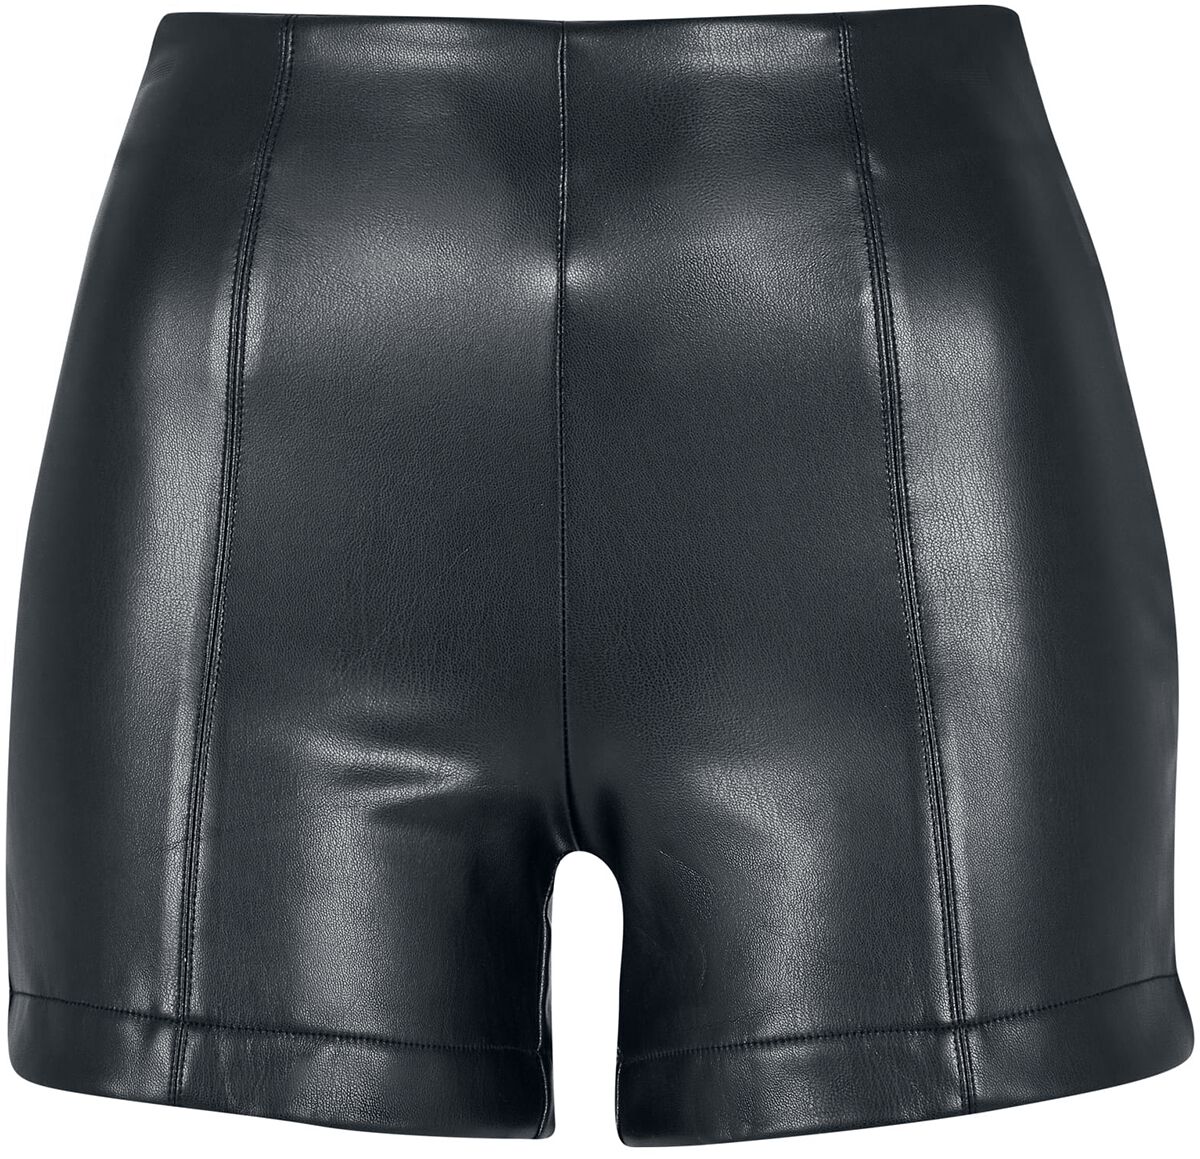 Image of Shorts di Urban Classics - Ladies’ faux-leather shorts - XS a 4XL - Donna - nero